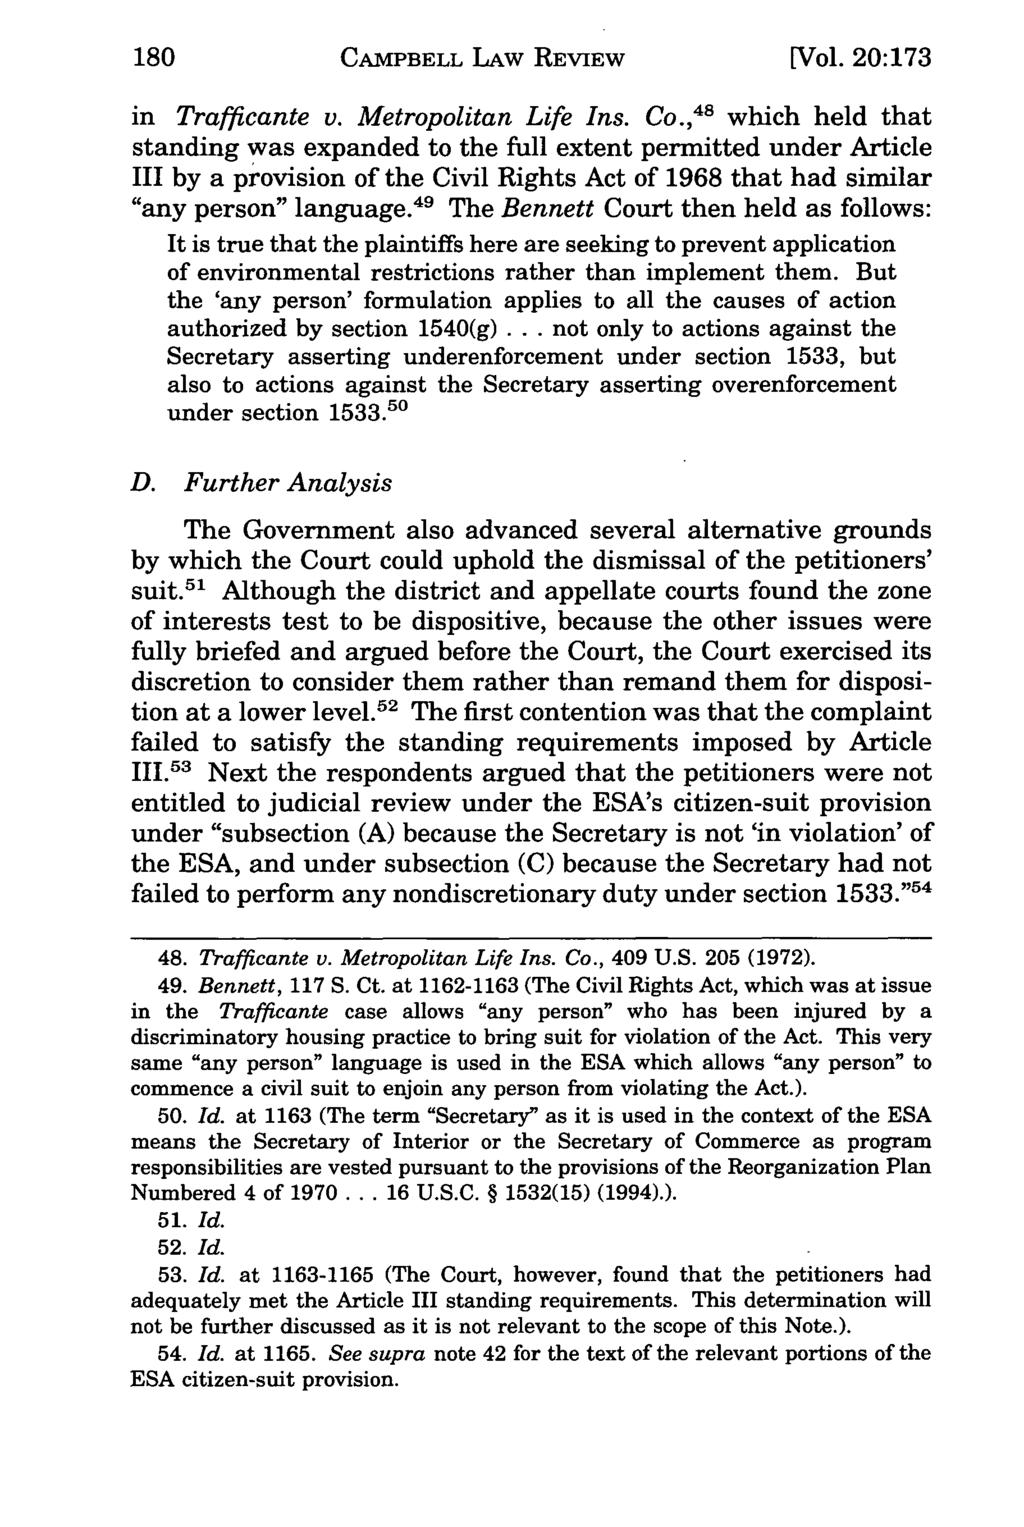 180 Campbell CAMPBELL Law Review, LAW Vol. 20, REVIEW Iss. 1 [1997], Art. 6 [Vol. 20:173 in Trafficante v. Metropolitan Life Ins. Co.